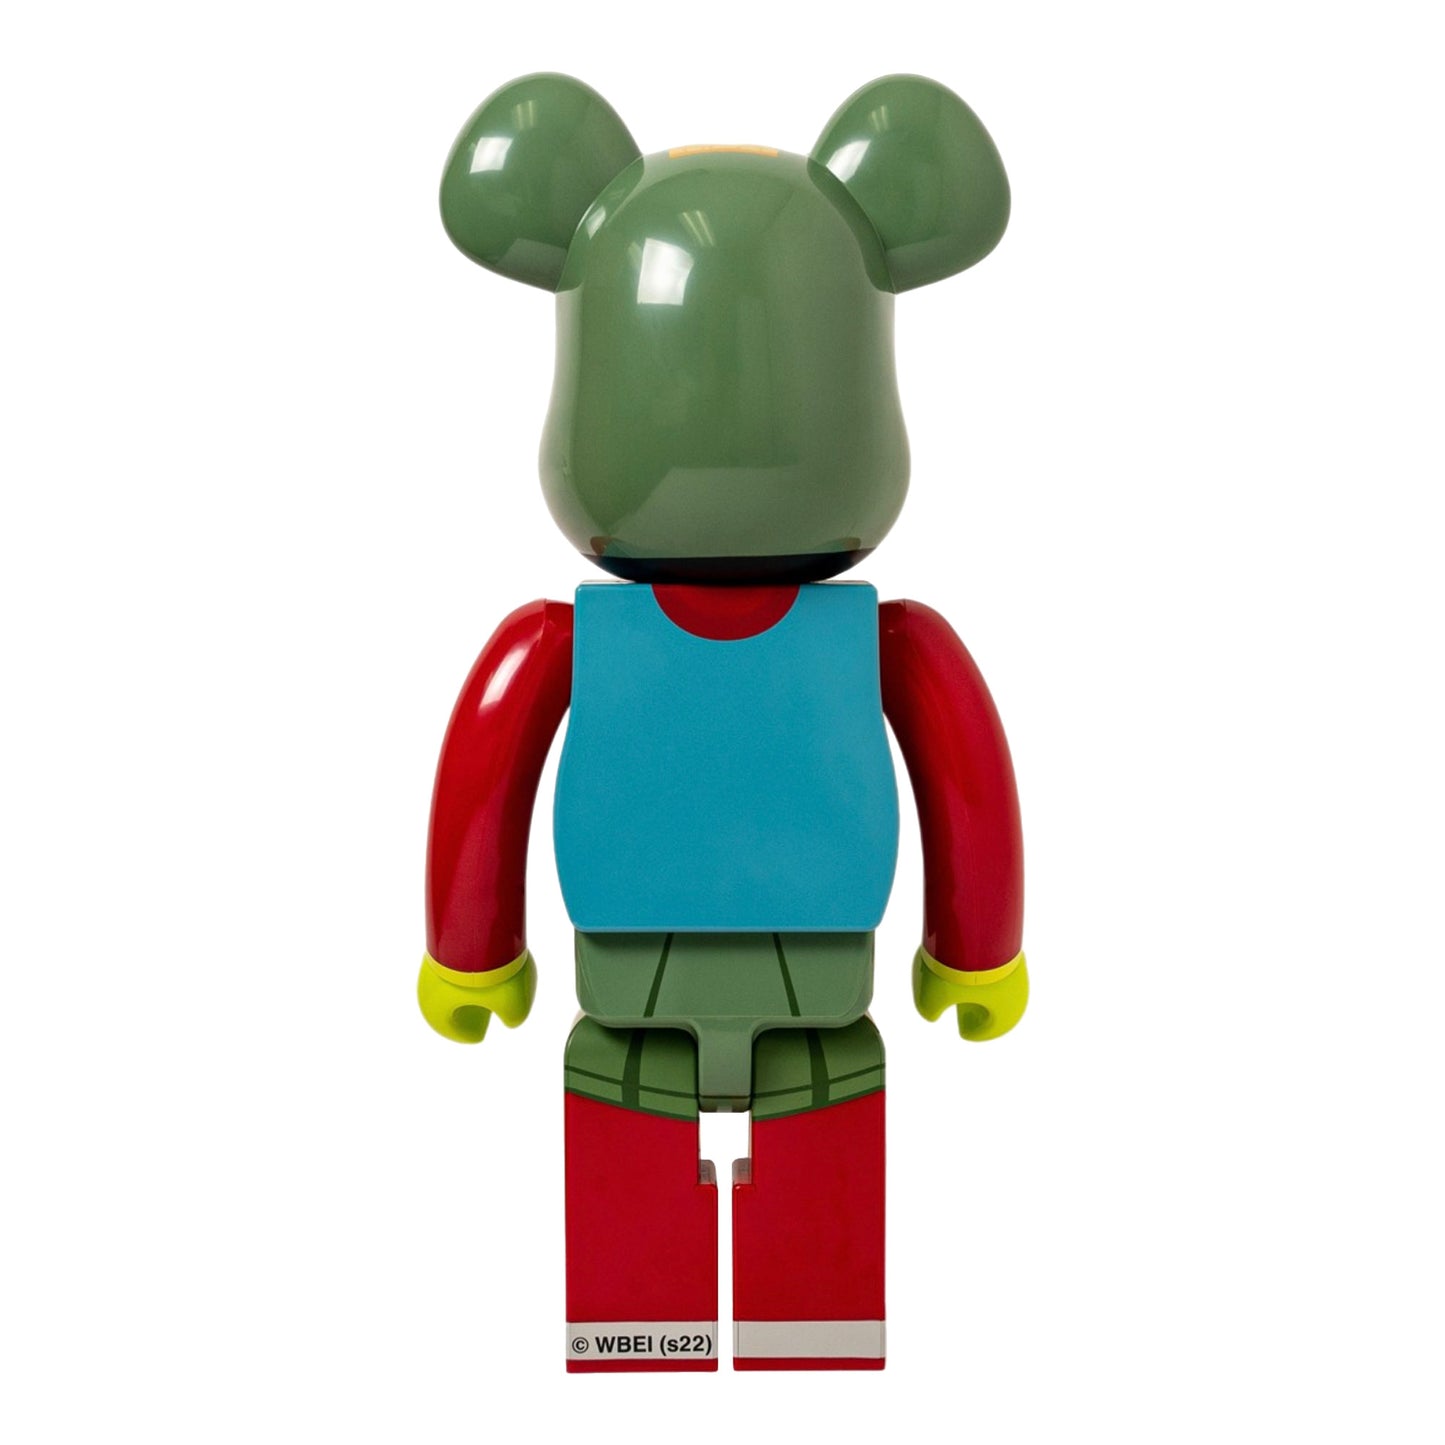 MEDICOM TOY: BE@RBRICK - Marvin The Martian Space Jam 1000%